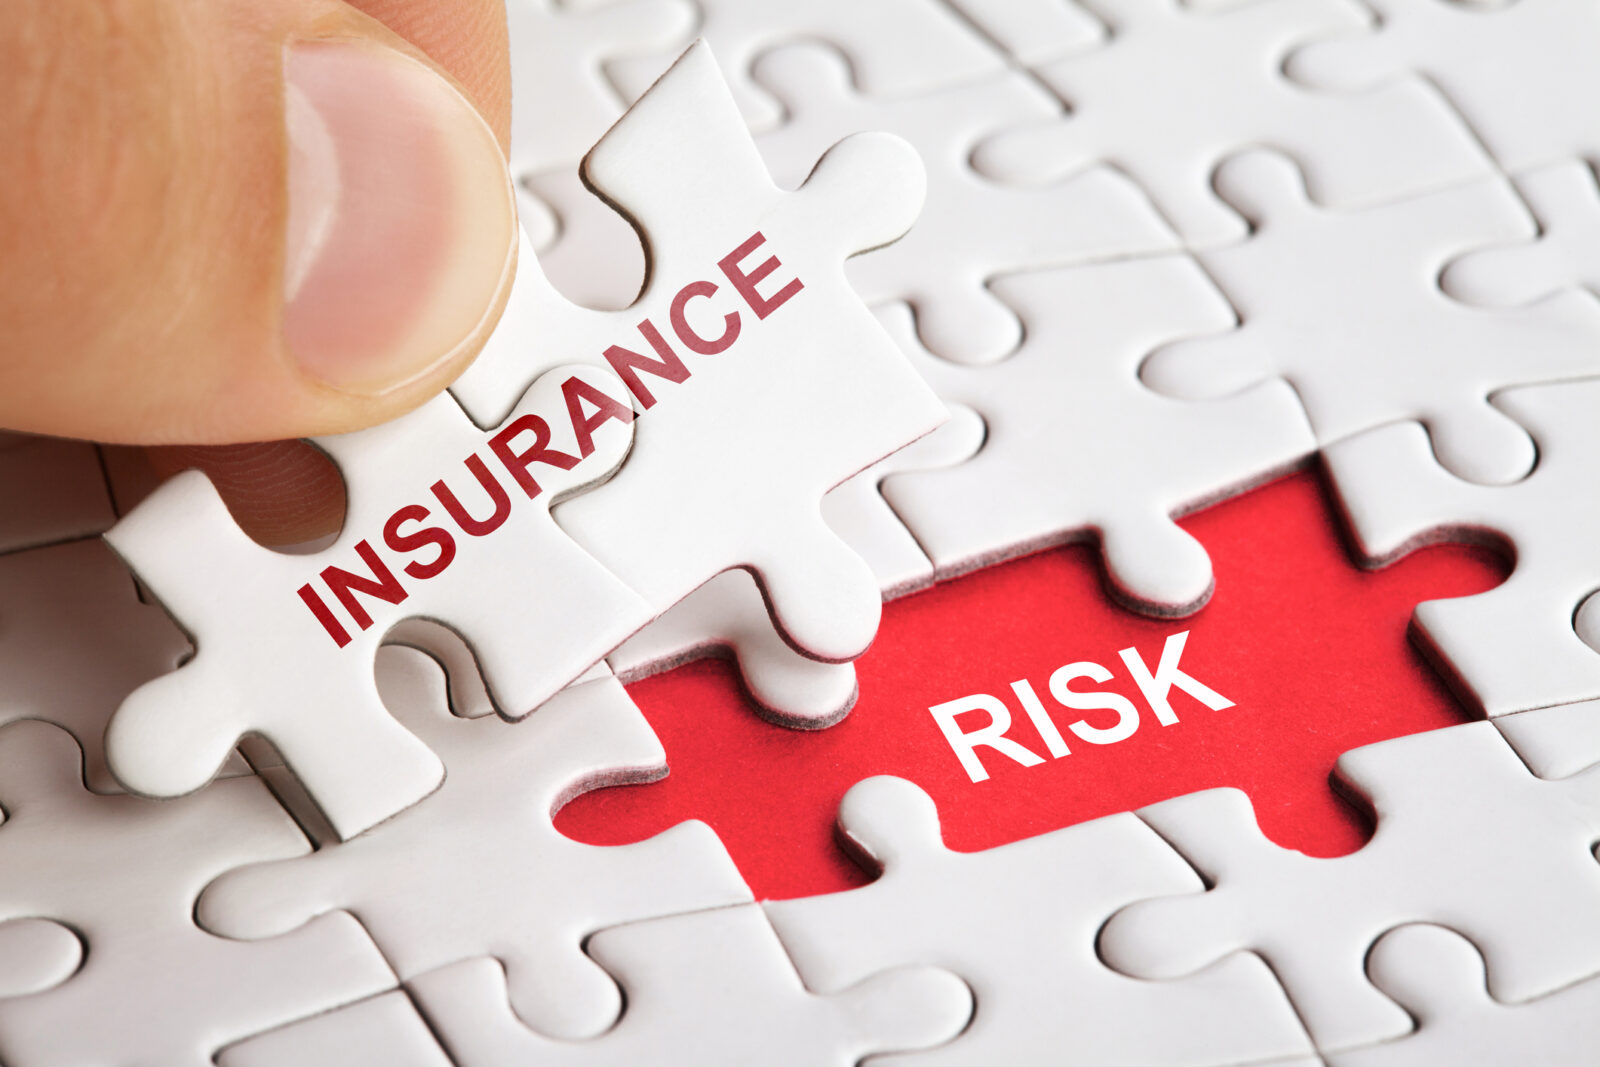 Small business insurance covering risk.